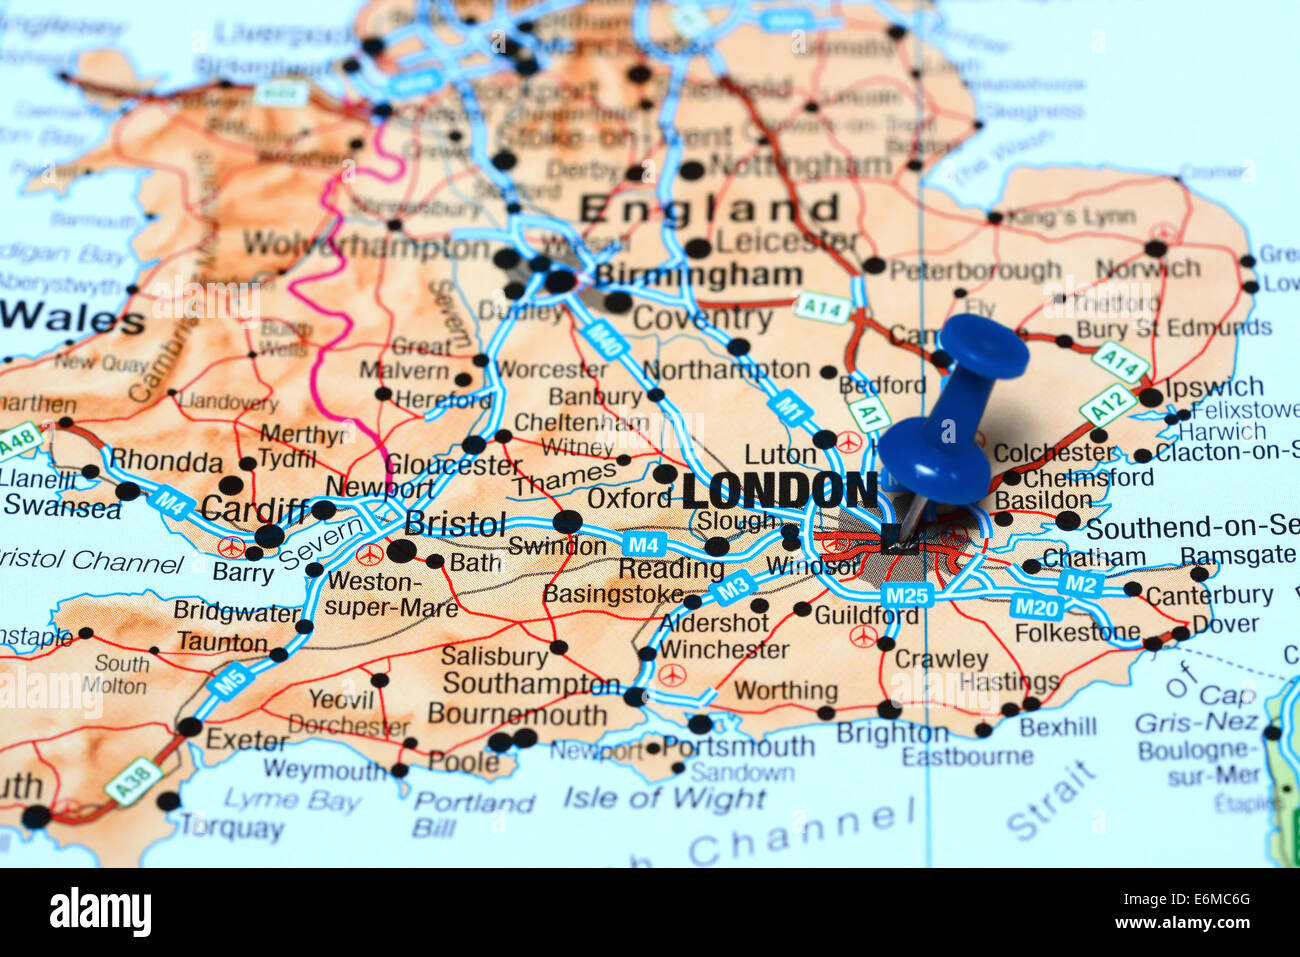 London pinned on a map of europe Stock Photo - Alamy